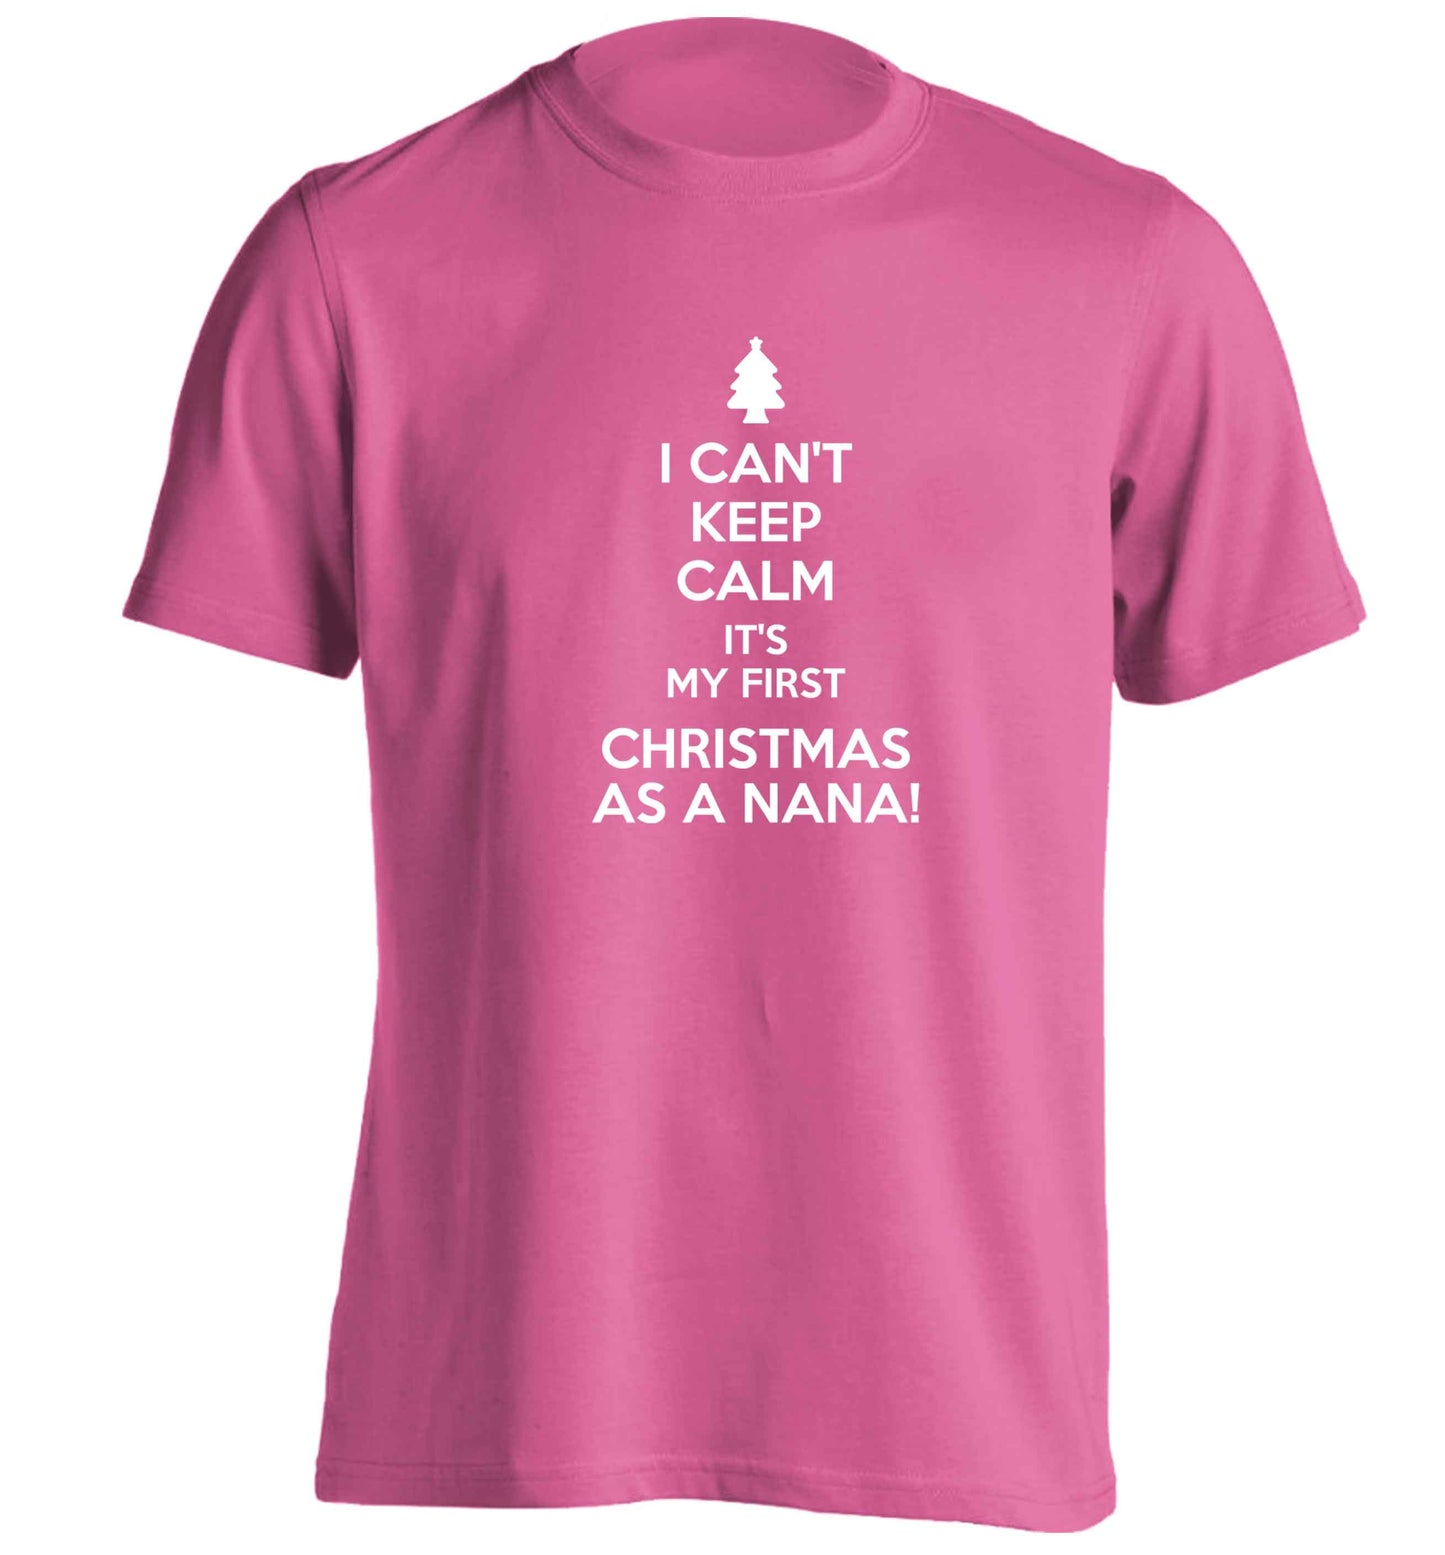 I can't keep calm it's my first Christmas as a nana! adults unisex pink Tshirt 2XL